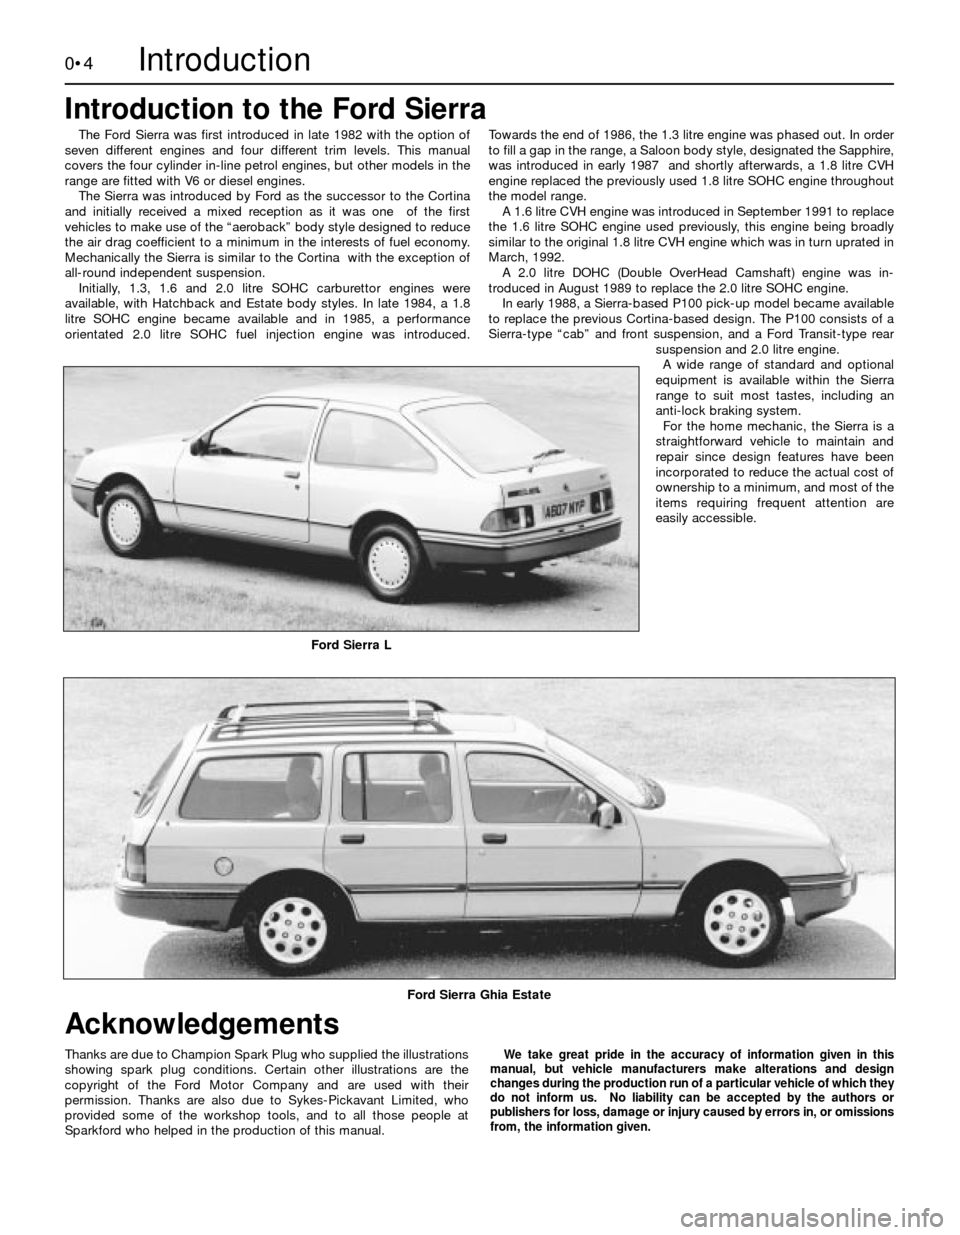 FORD SIERRA 1985 1.G Introduction Workshop Manual 0•4
The Ford Sierra was first introduced in late 1982 with the option of
seven different engines and four different trim levels. This manual
covers the four cylinder in-line petrol engines, but othe